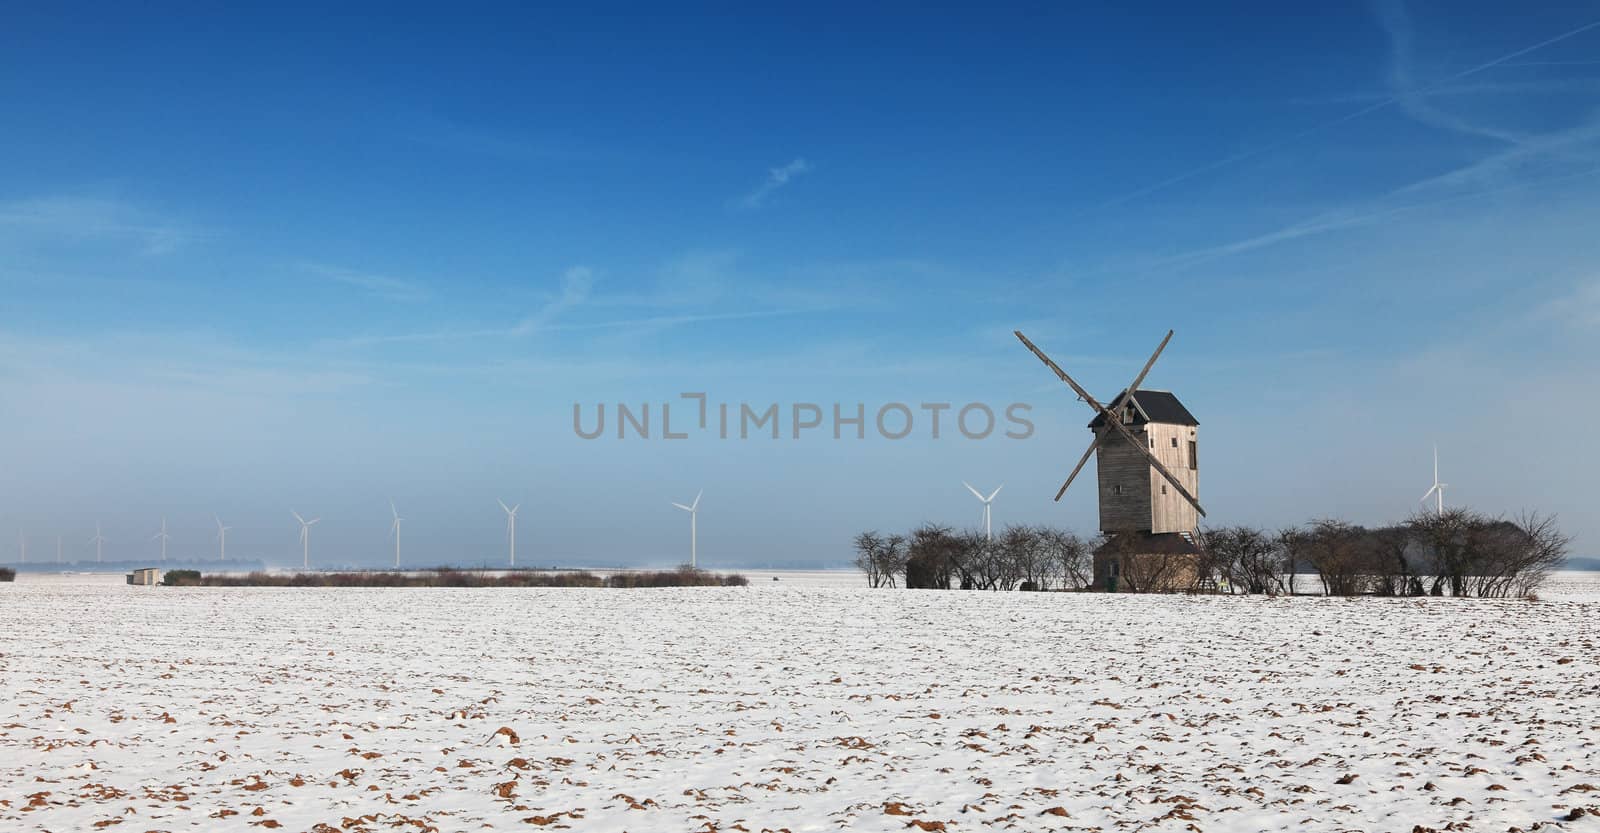 Winter landscape in the central region of France, with a traditional wooden windmill and some modern windturibines in the distance.